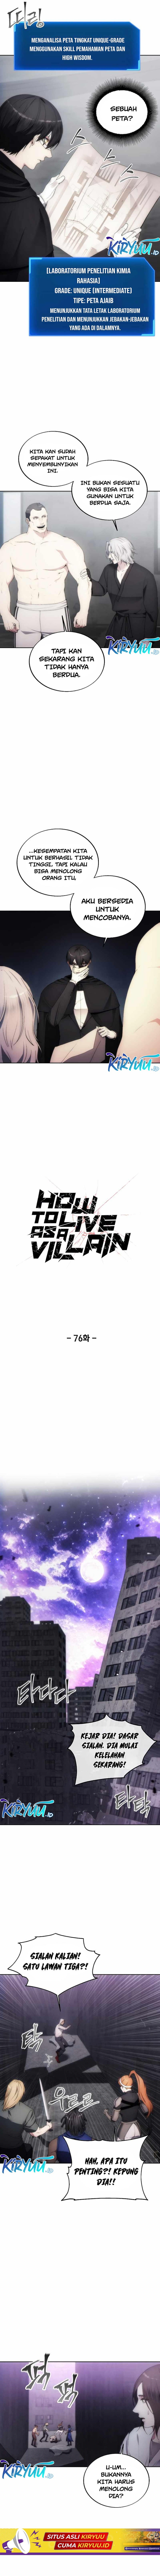 How To Live As A Villain Chapter 76 - 85